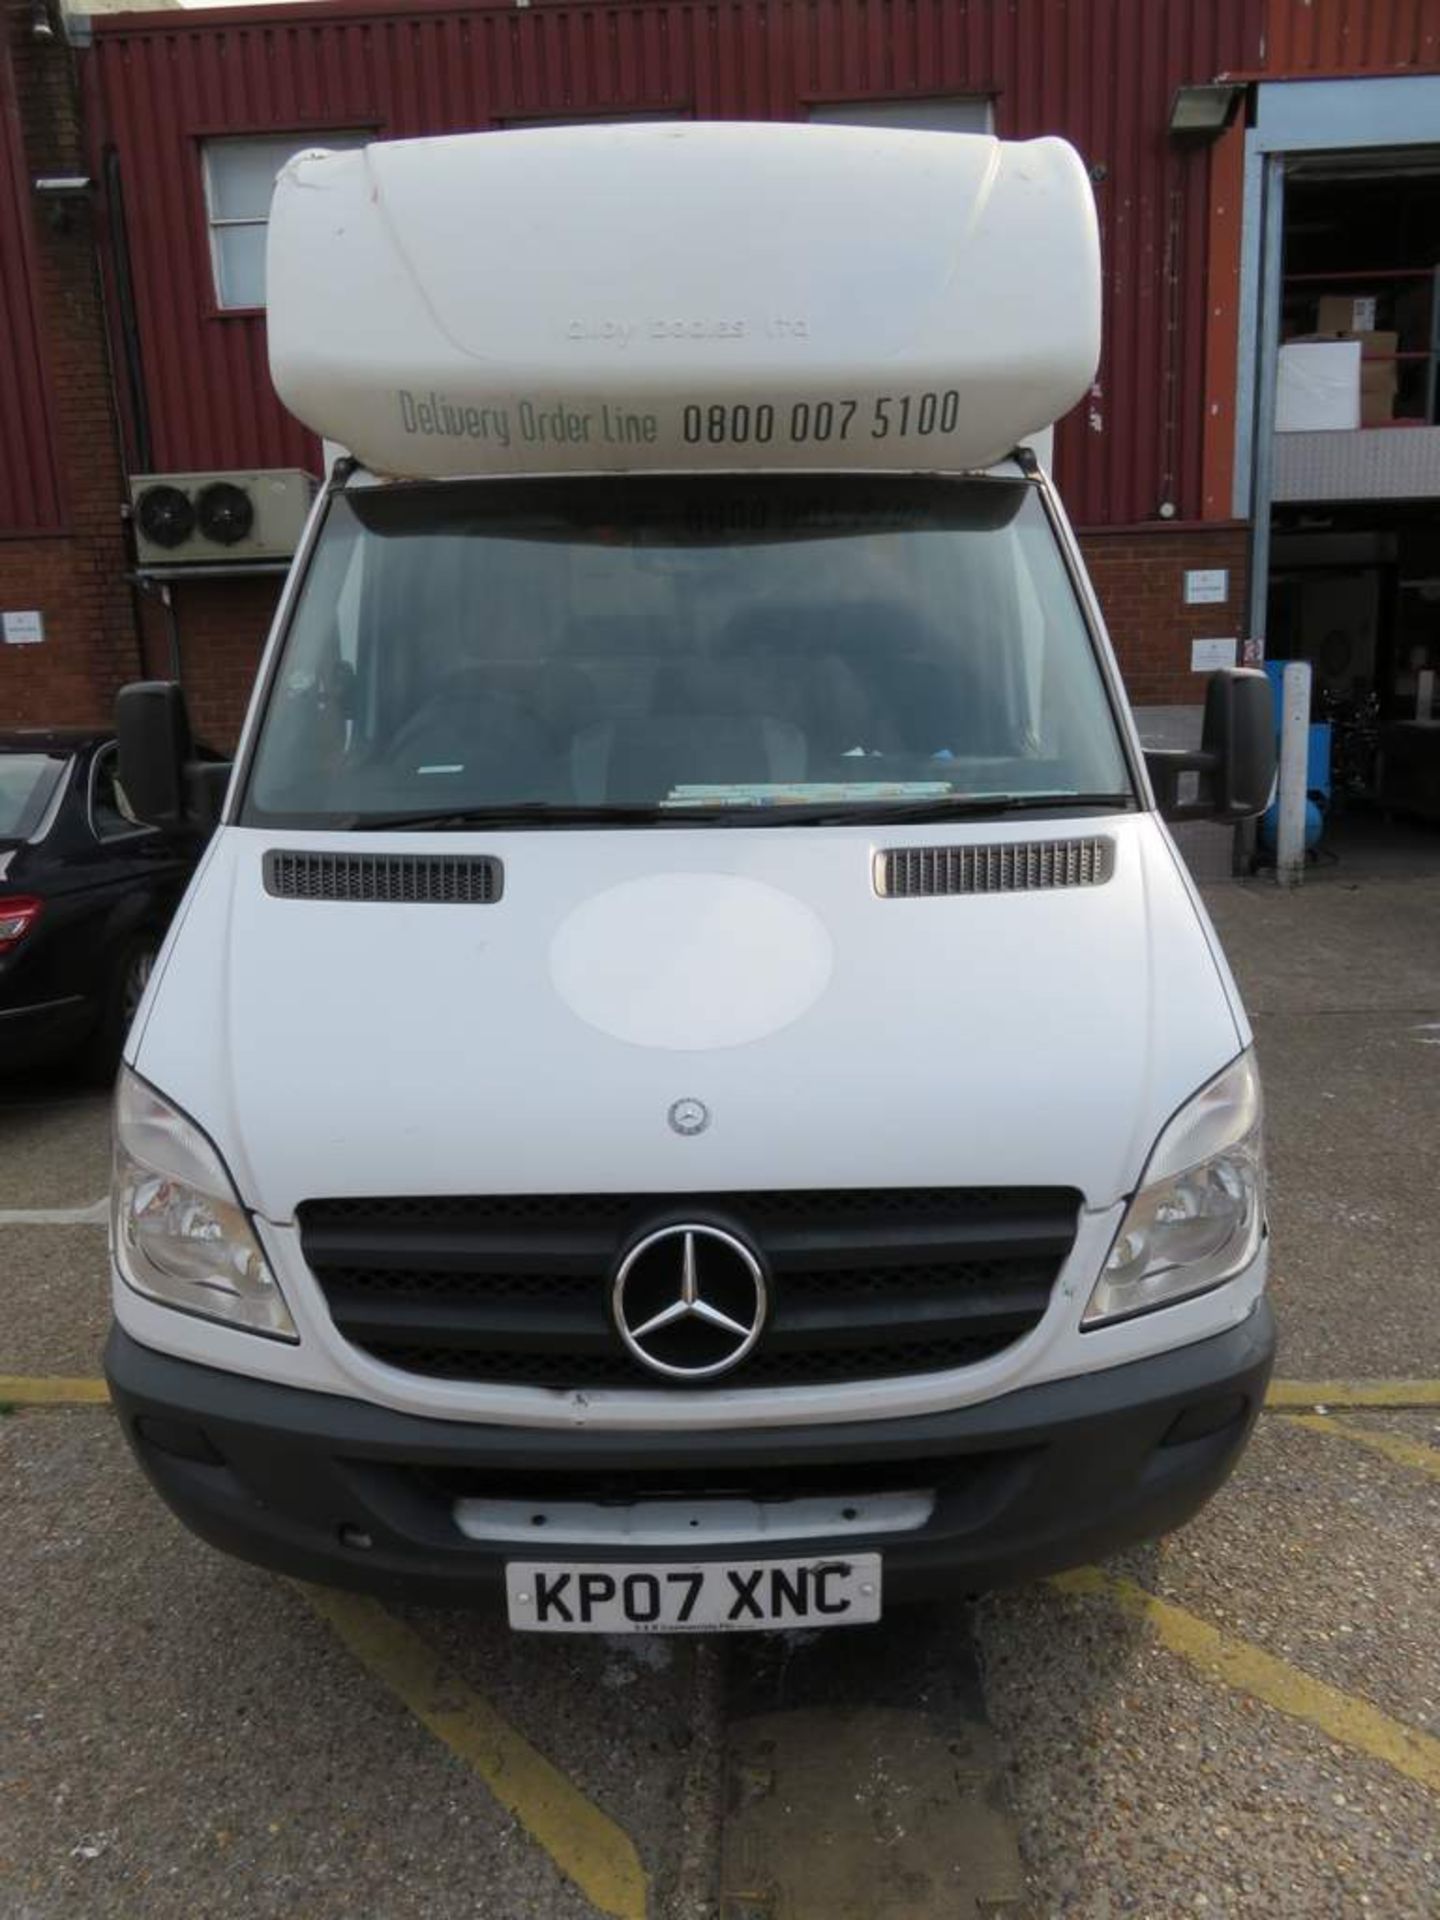 2007 Mercedes Sprinter 311 Luton Van. Fitted with a Slim Jim 500kg taillift - Image 3 of 18